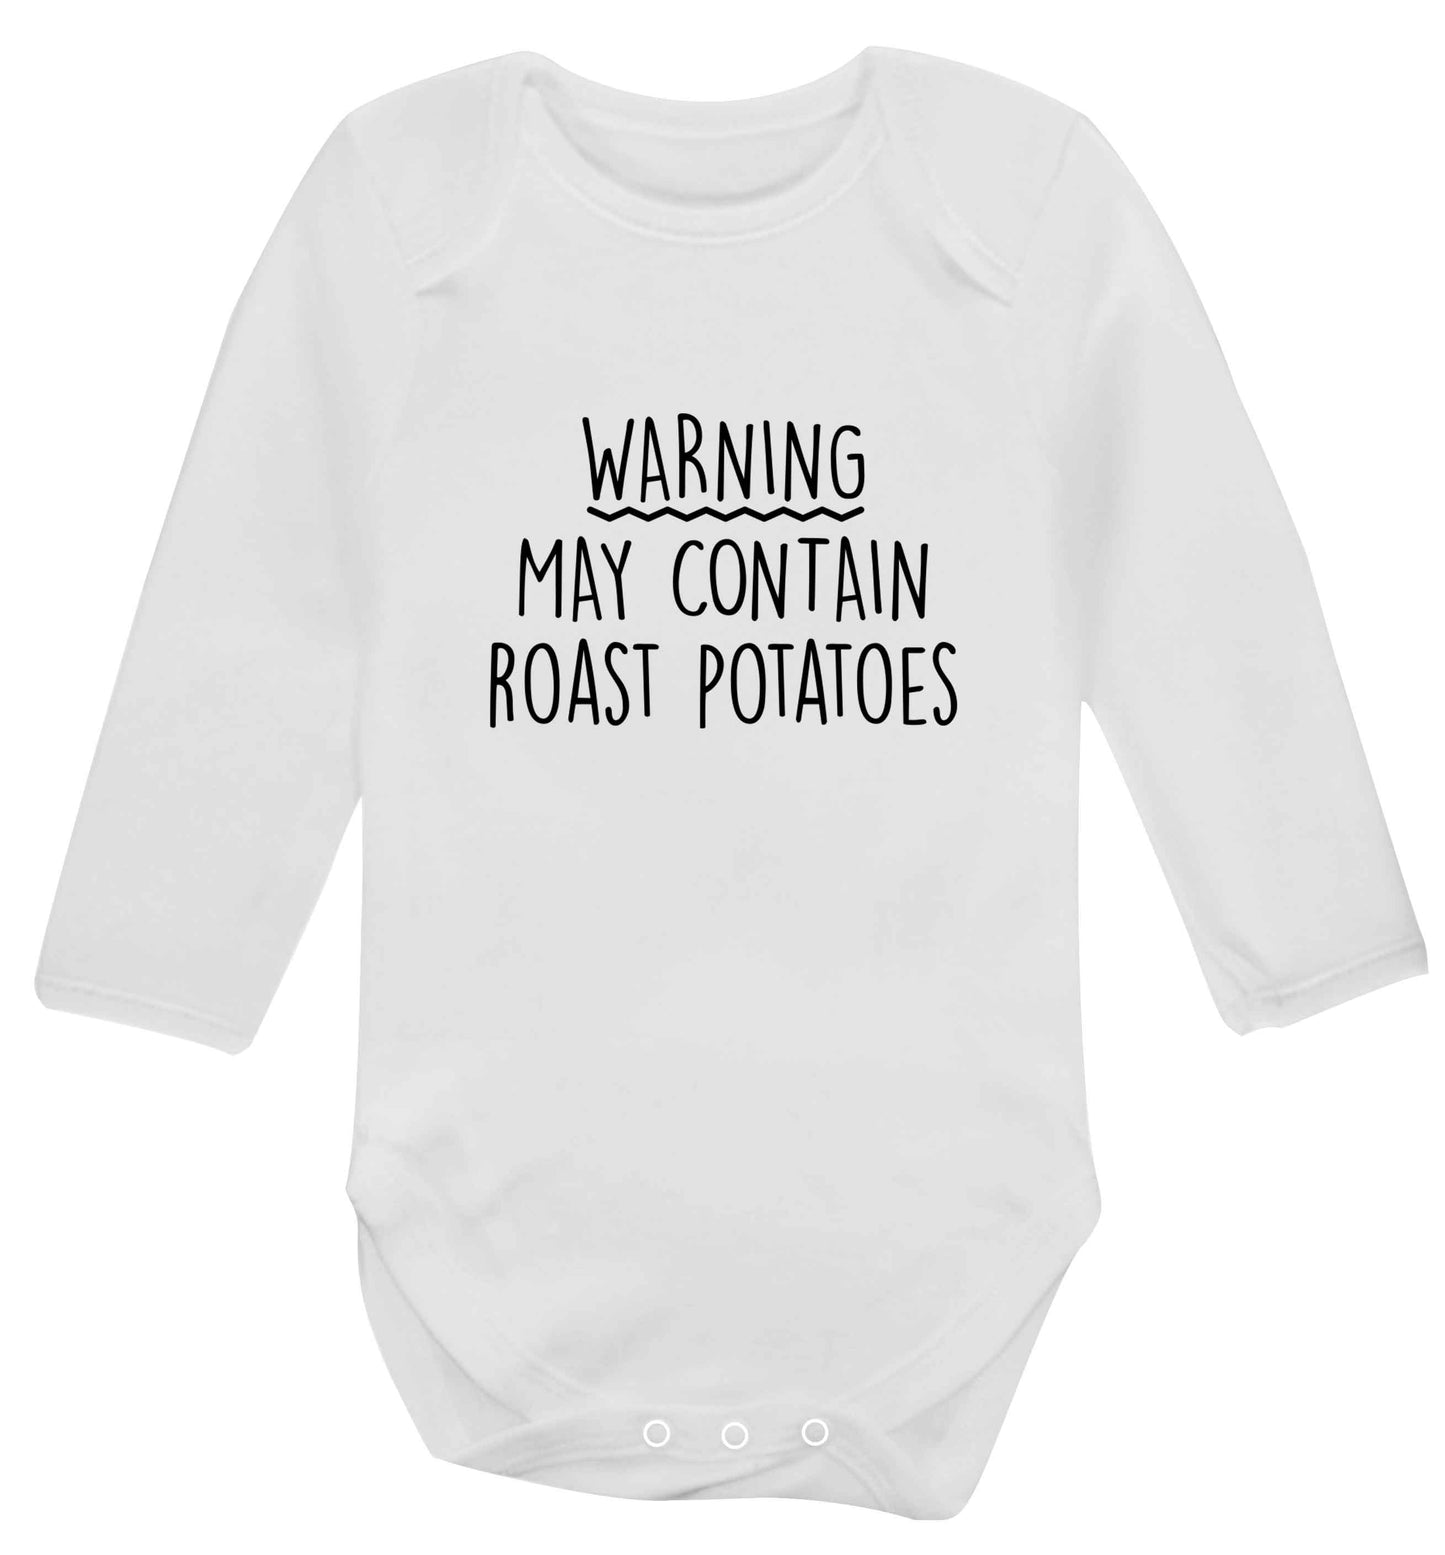 Warning may containg roast potatoes baby vest long sleeved white 6-12 months